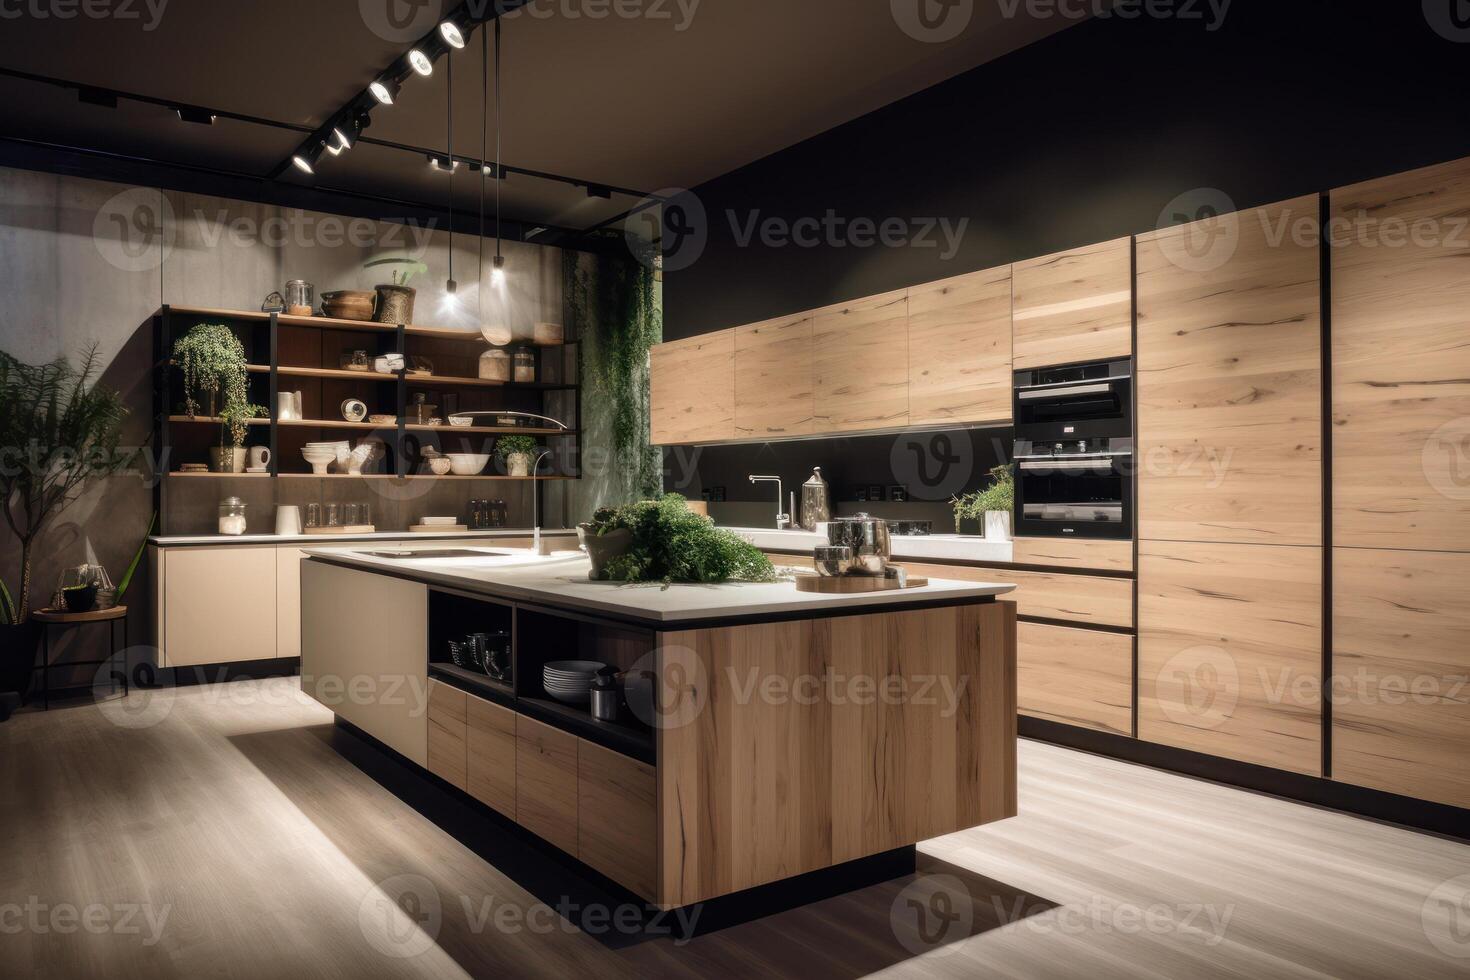 stock photo of a nature and simplistic kitchen in shop open space mode photography